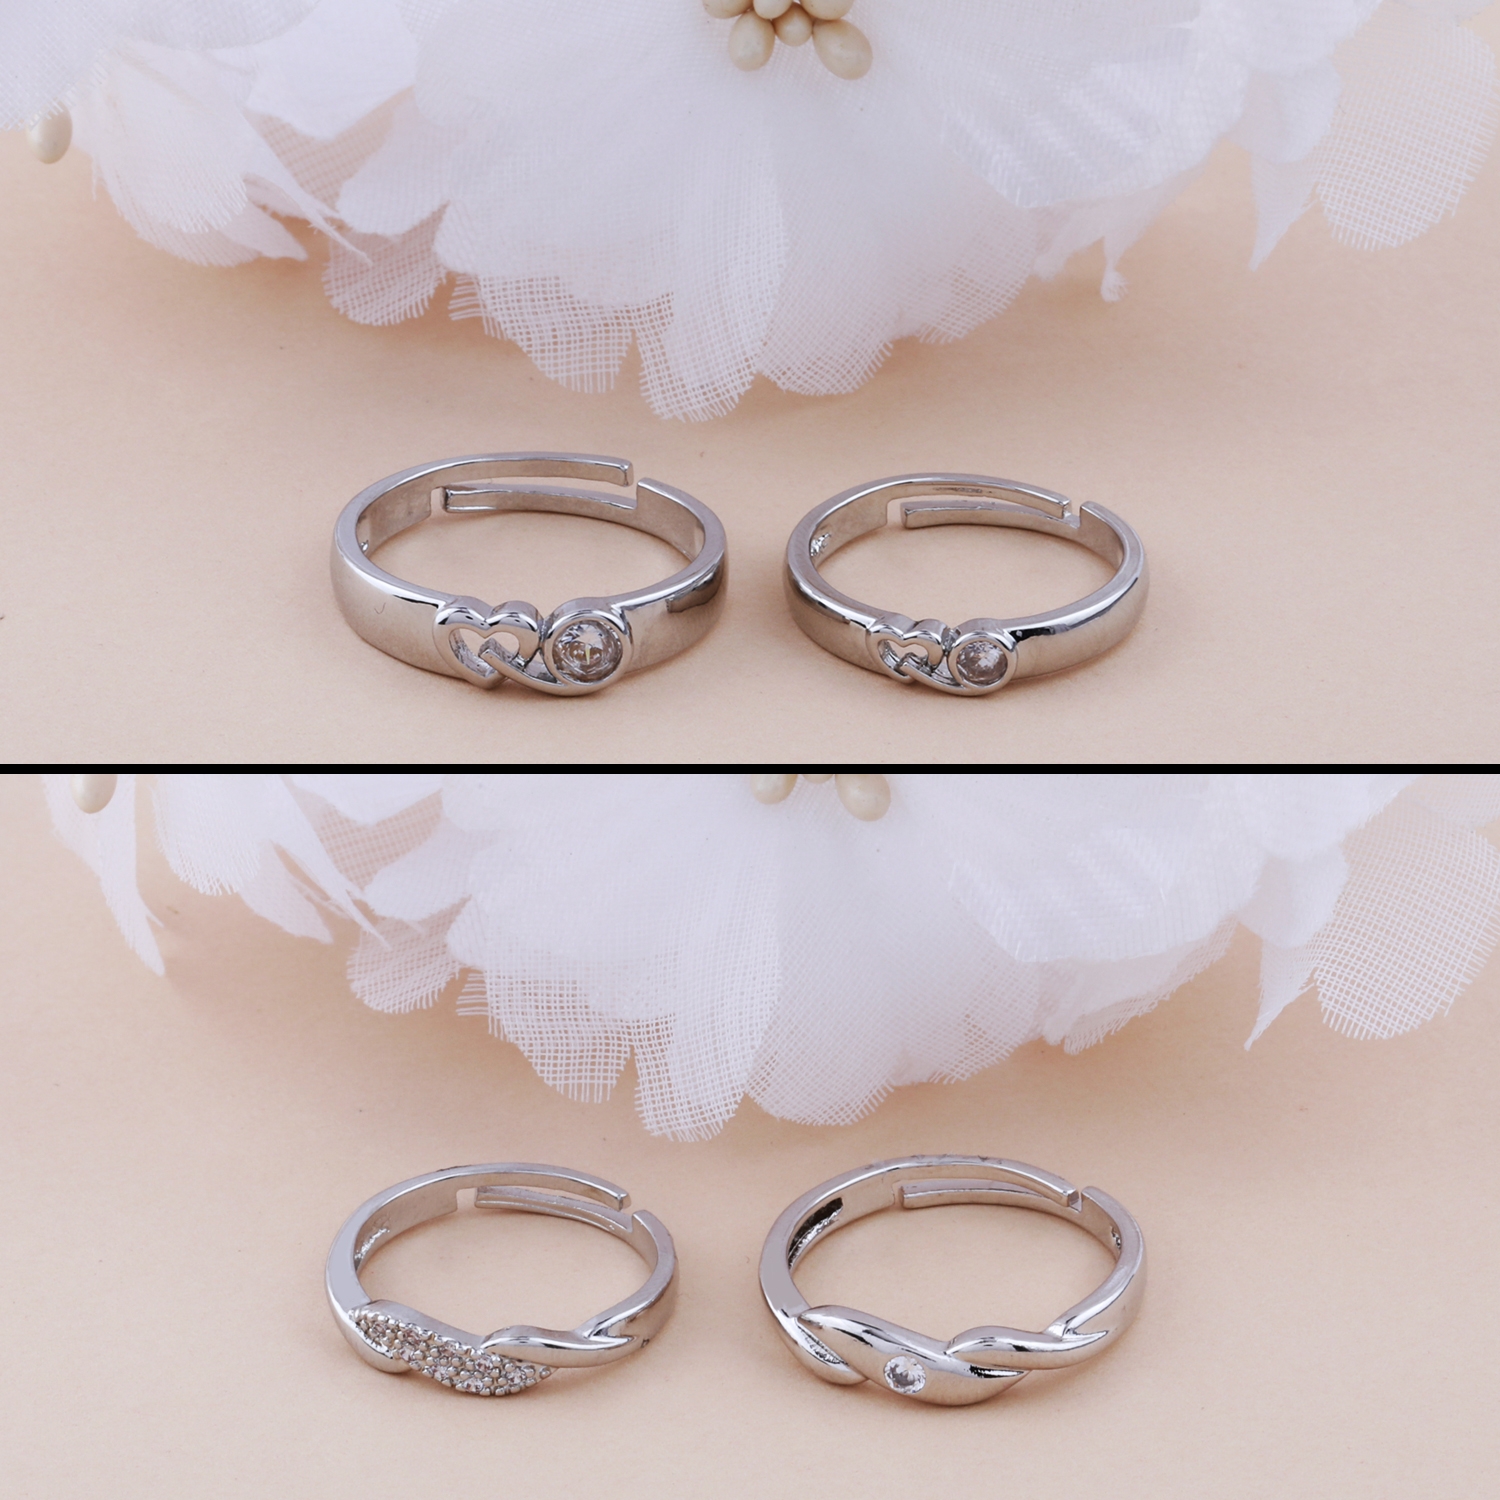 SILVER SHINE |  Adjustable Couple Rings Set for lovers Silver Plated Designer Solitaire for Men and Women 2 Pair 